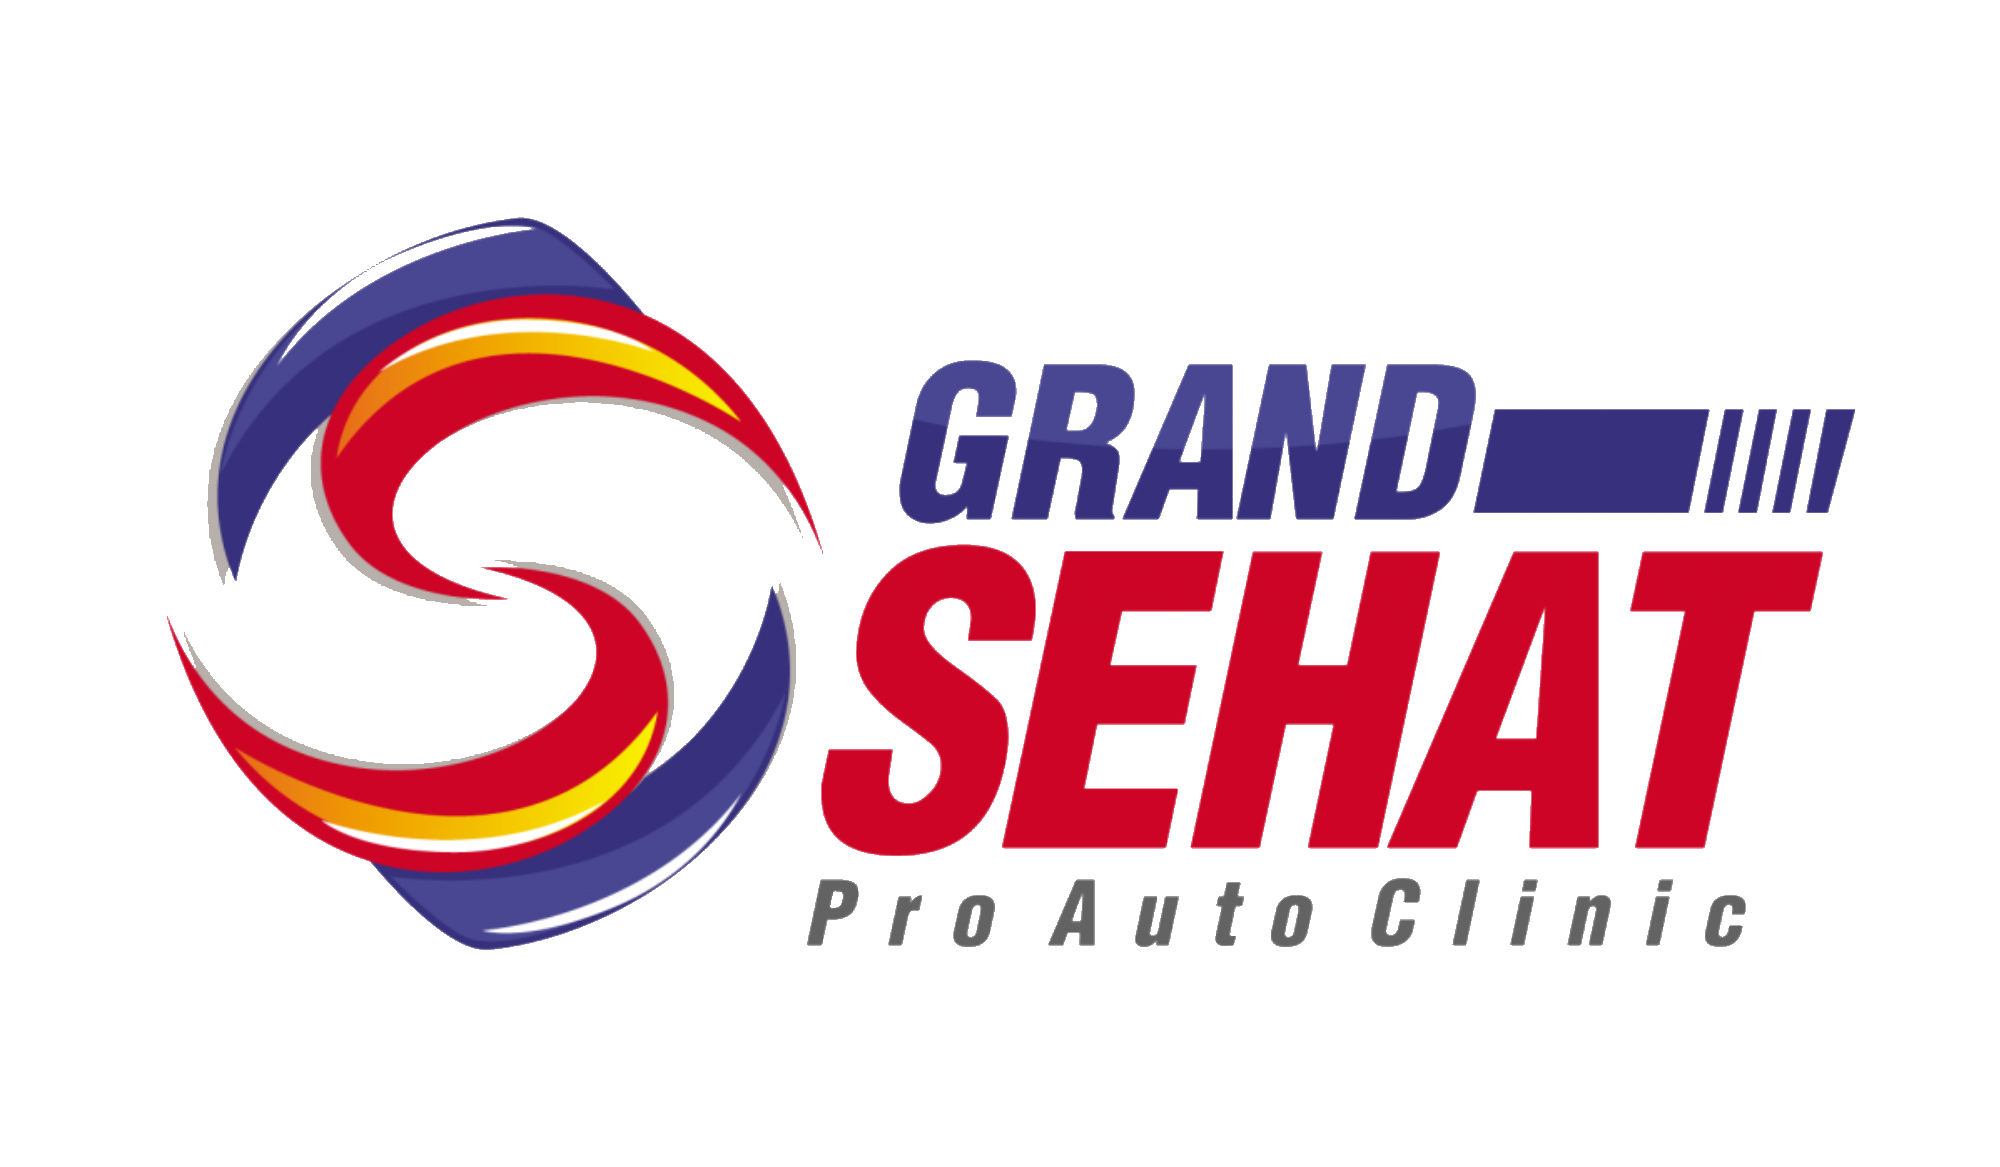 Grand Sehat